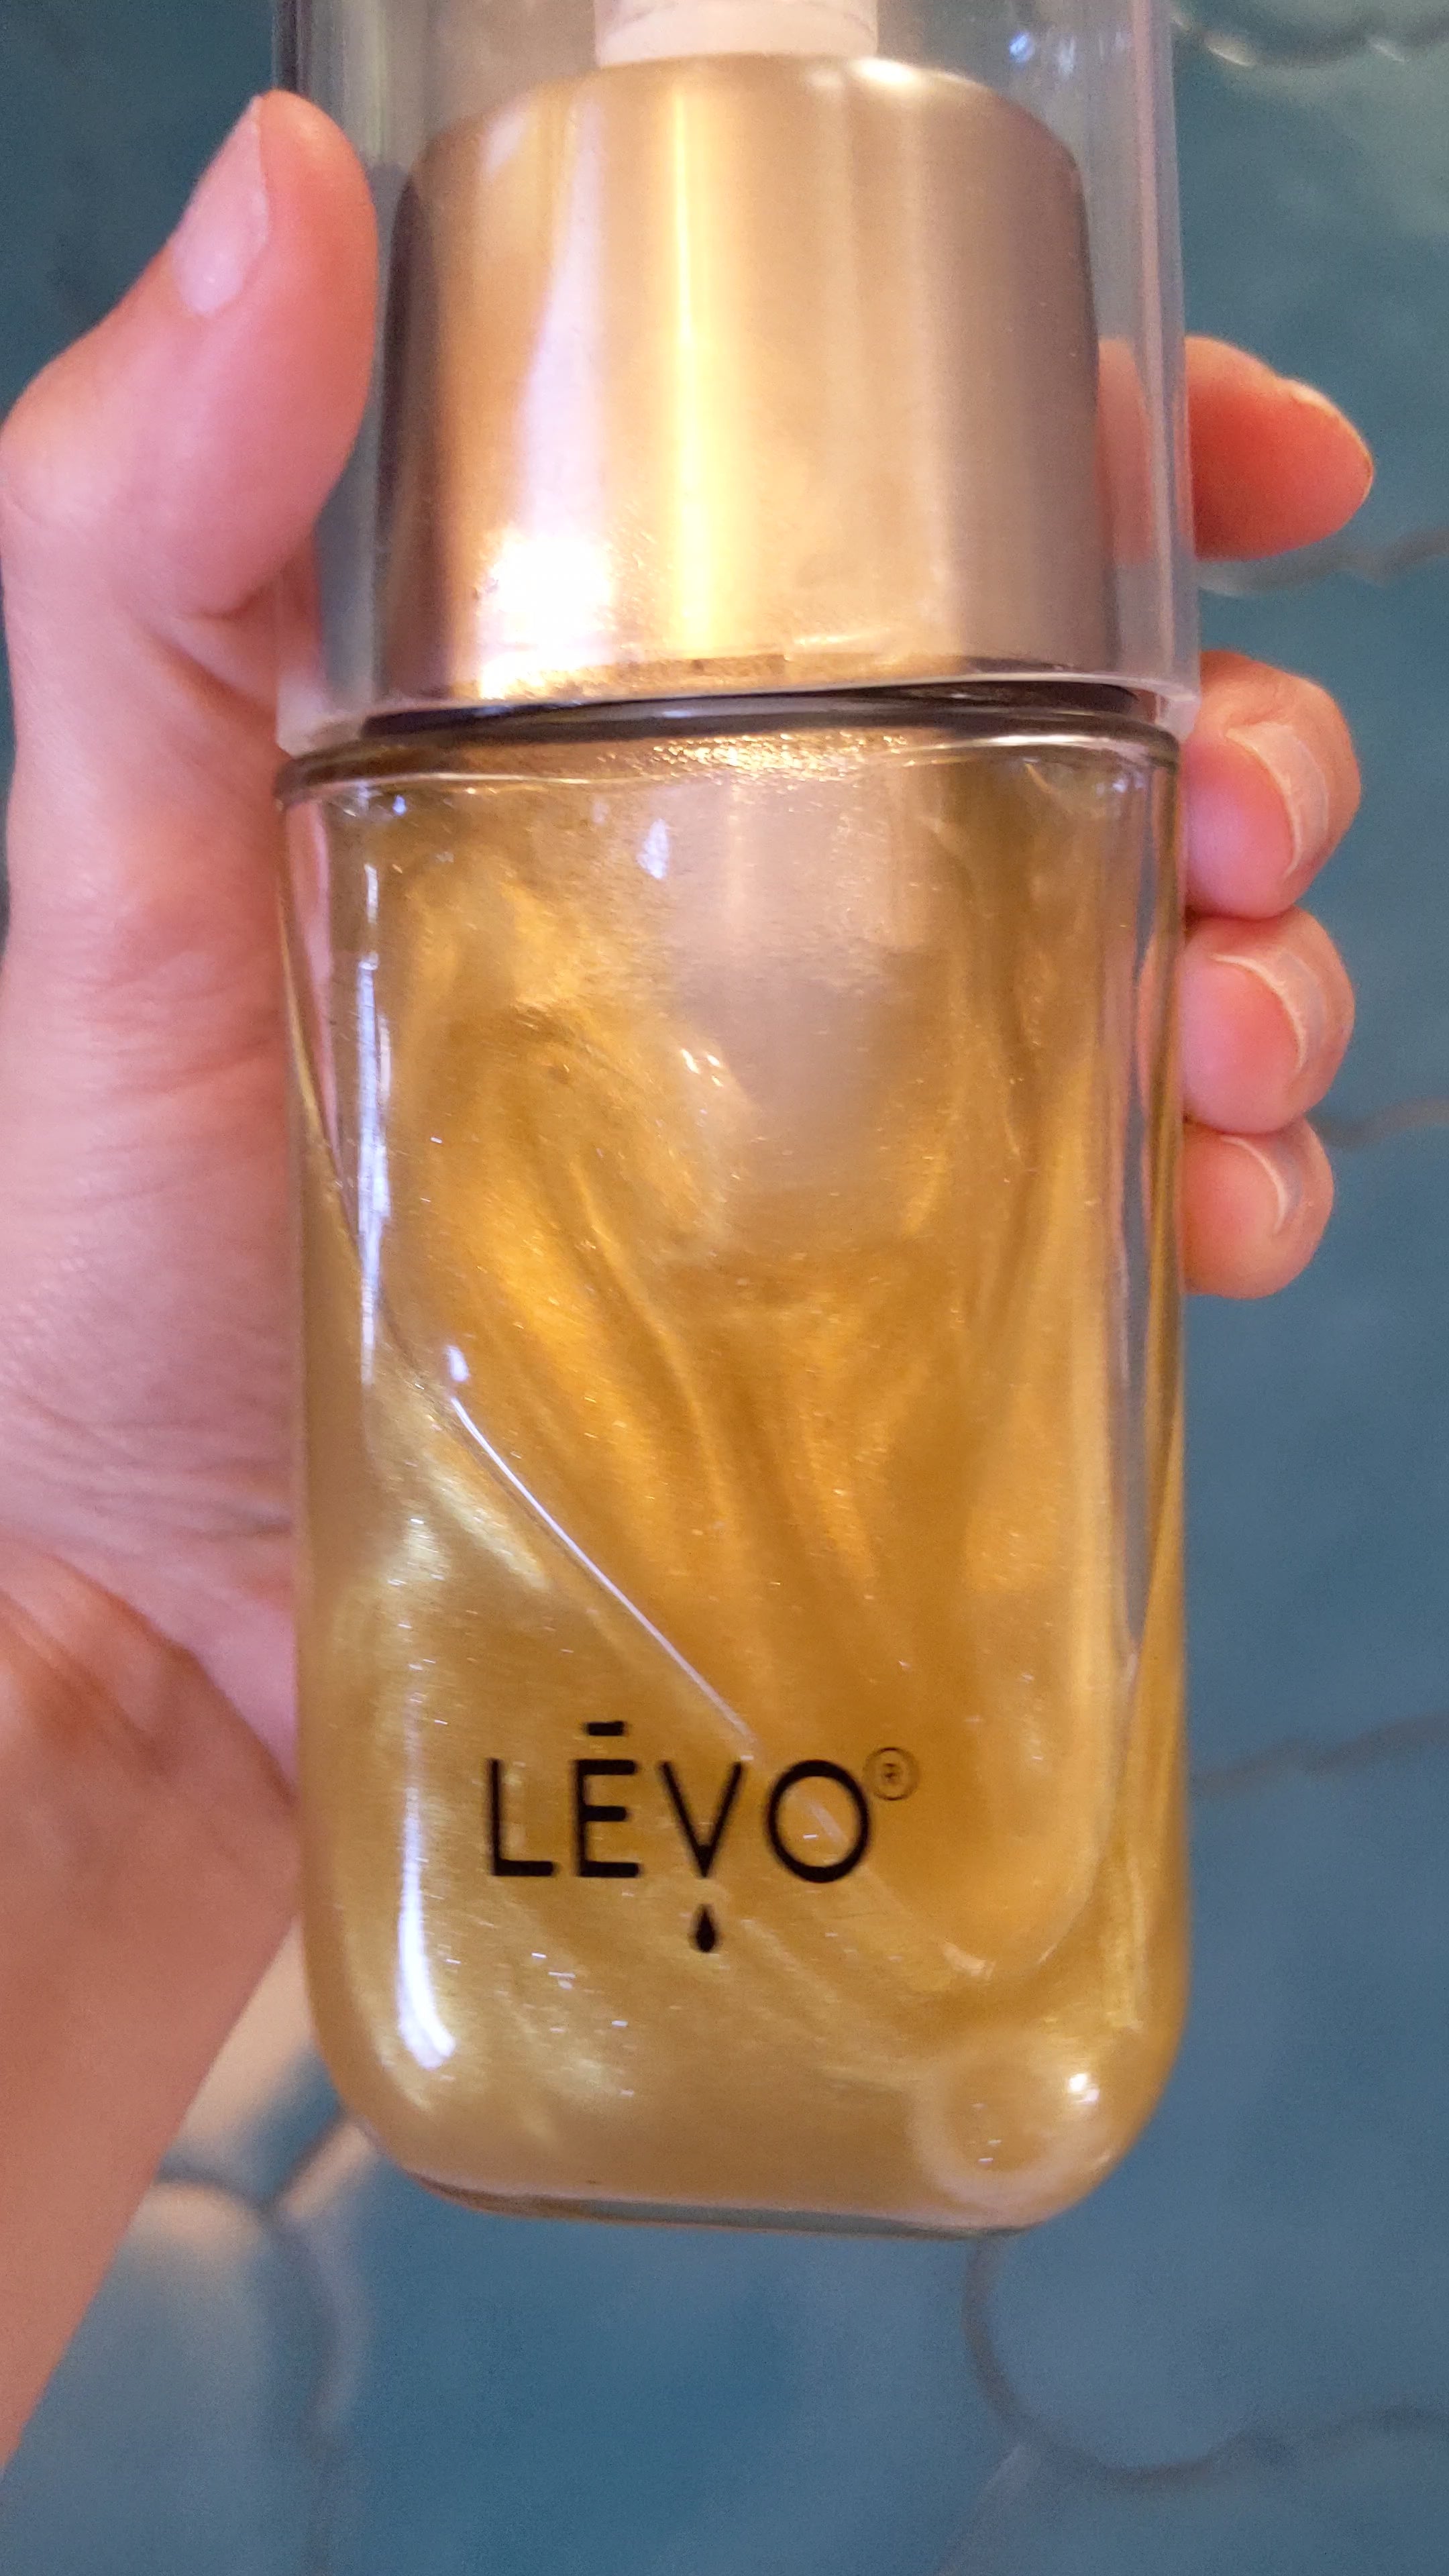 LEVO Infusion Sprayer with infusion shimmer edible glitter in oil